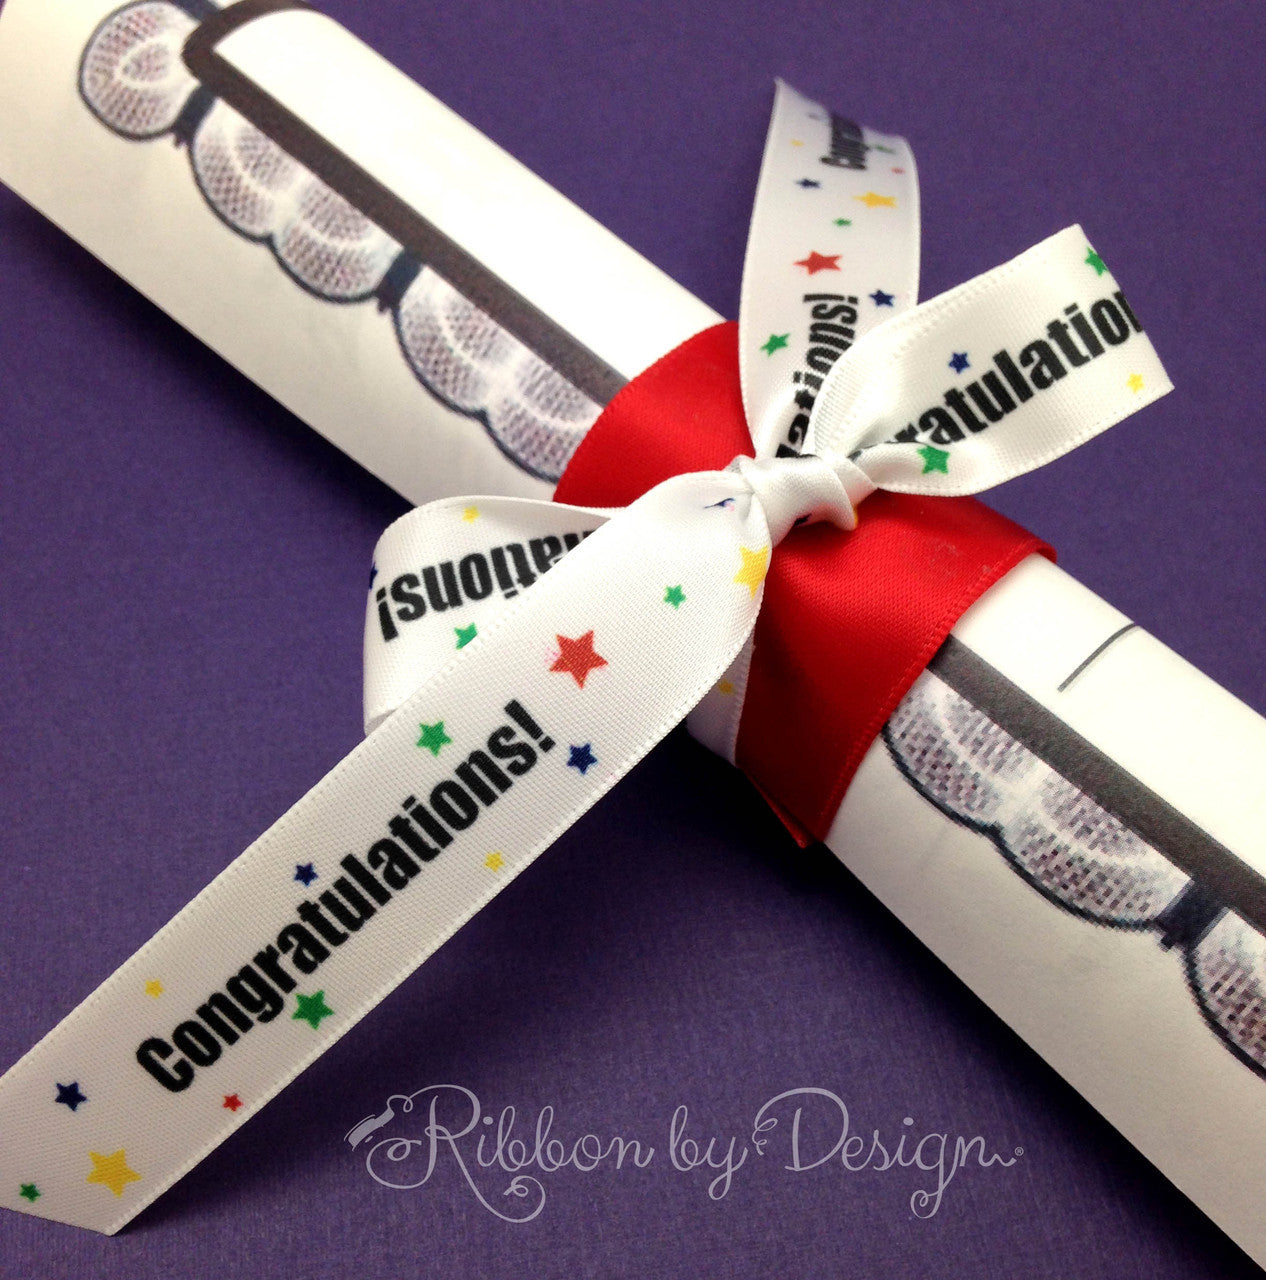 Graduation is the perfect time to tie our fun ribbon on a gift or favor!